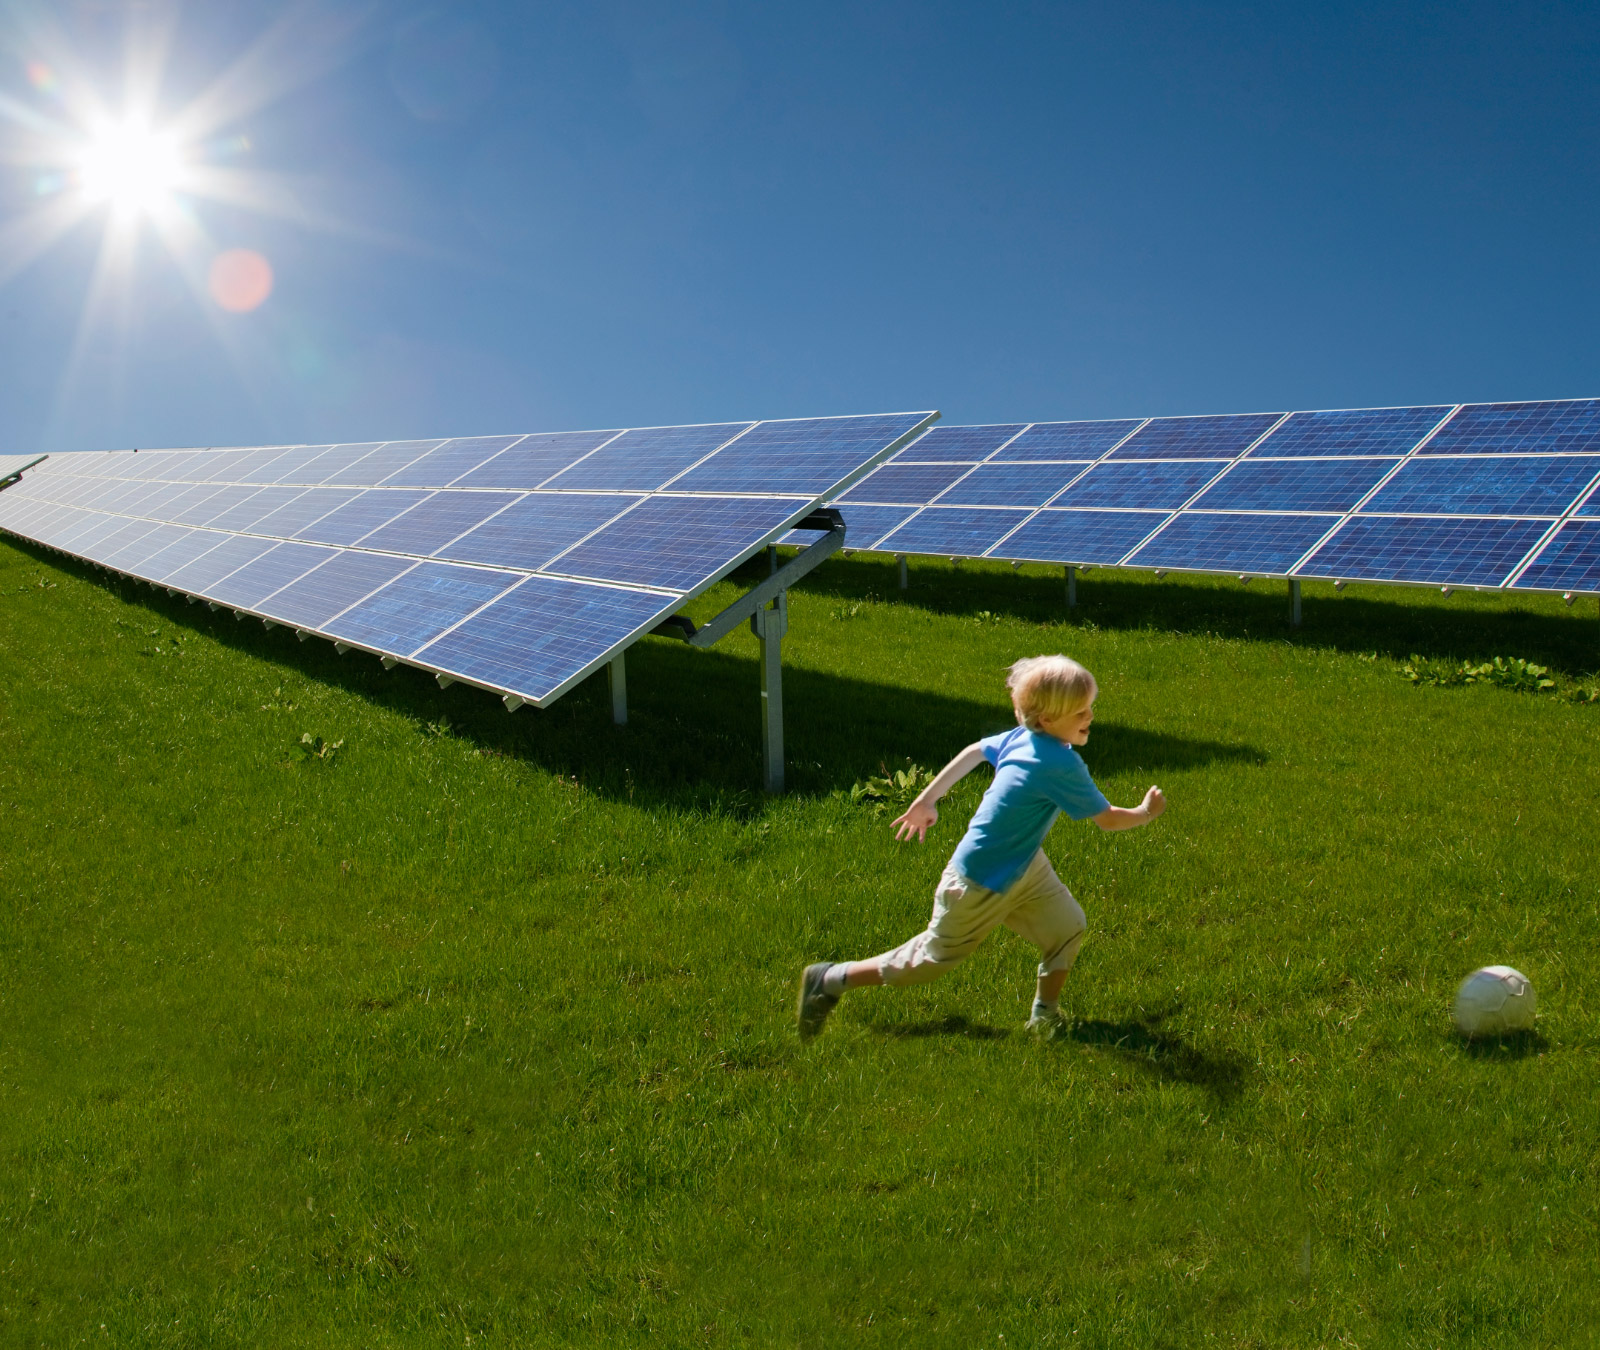 A child is chasing a soccer ball in a grassy field with solar panels in the background.